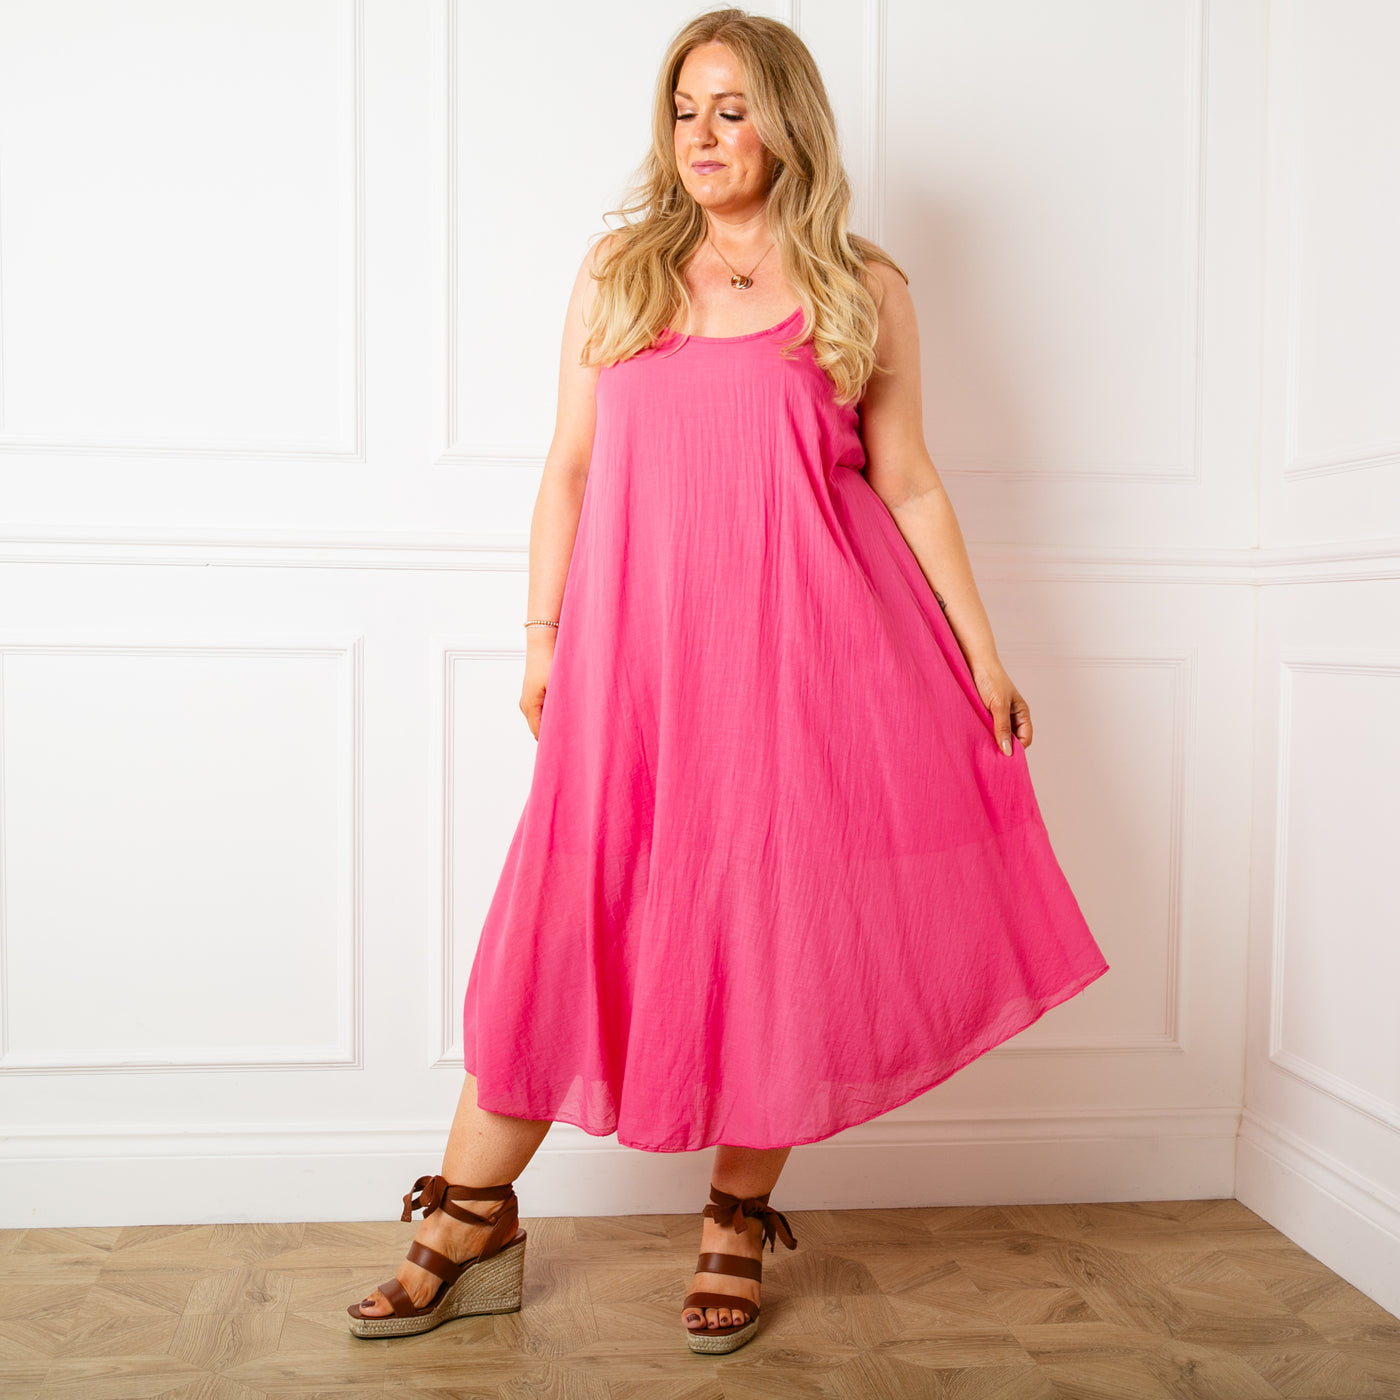 The pink Two Piece Dress with a midi dress that has straps, a round neckline and a lining underneath